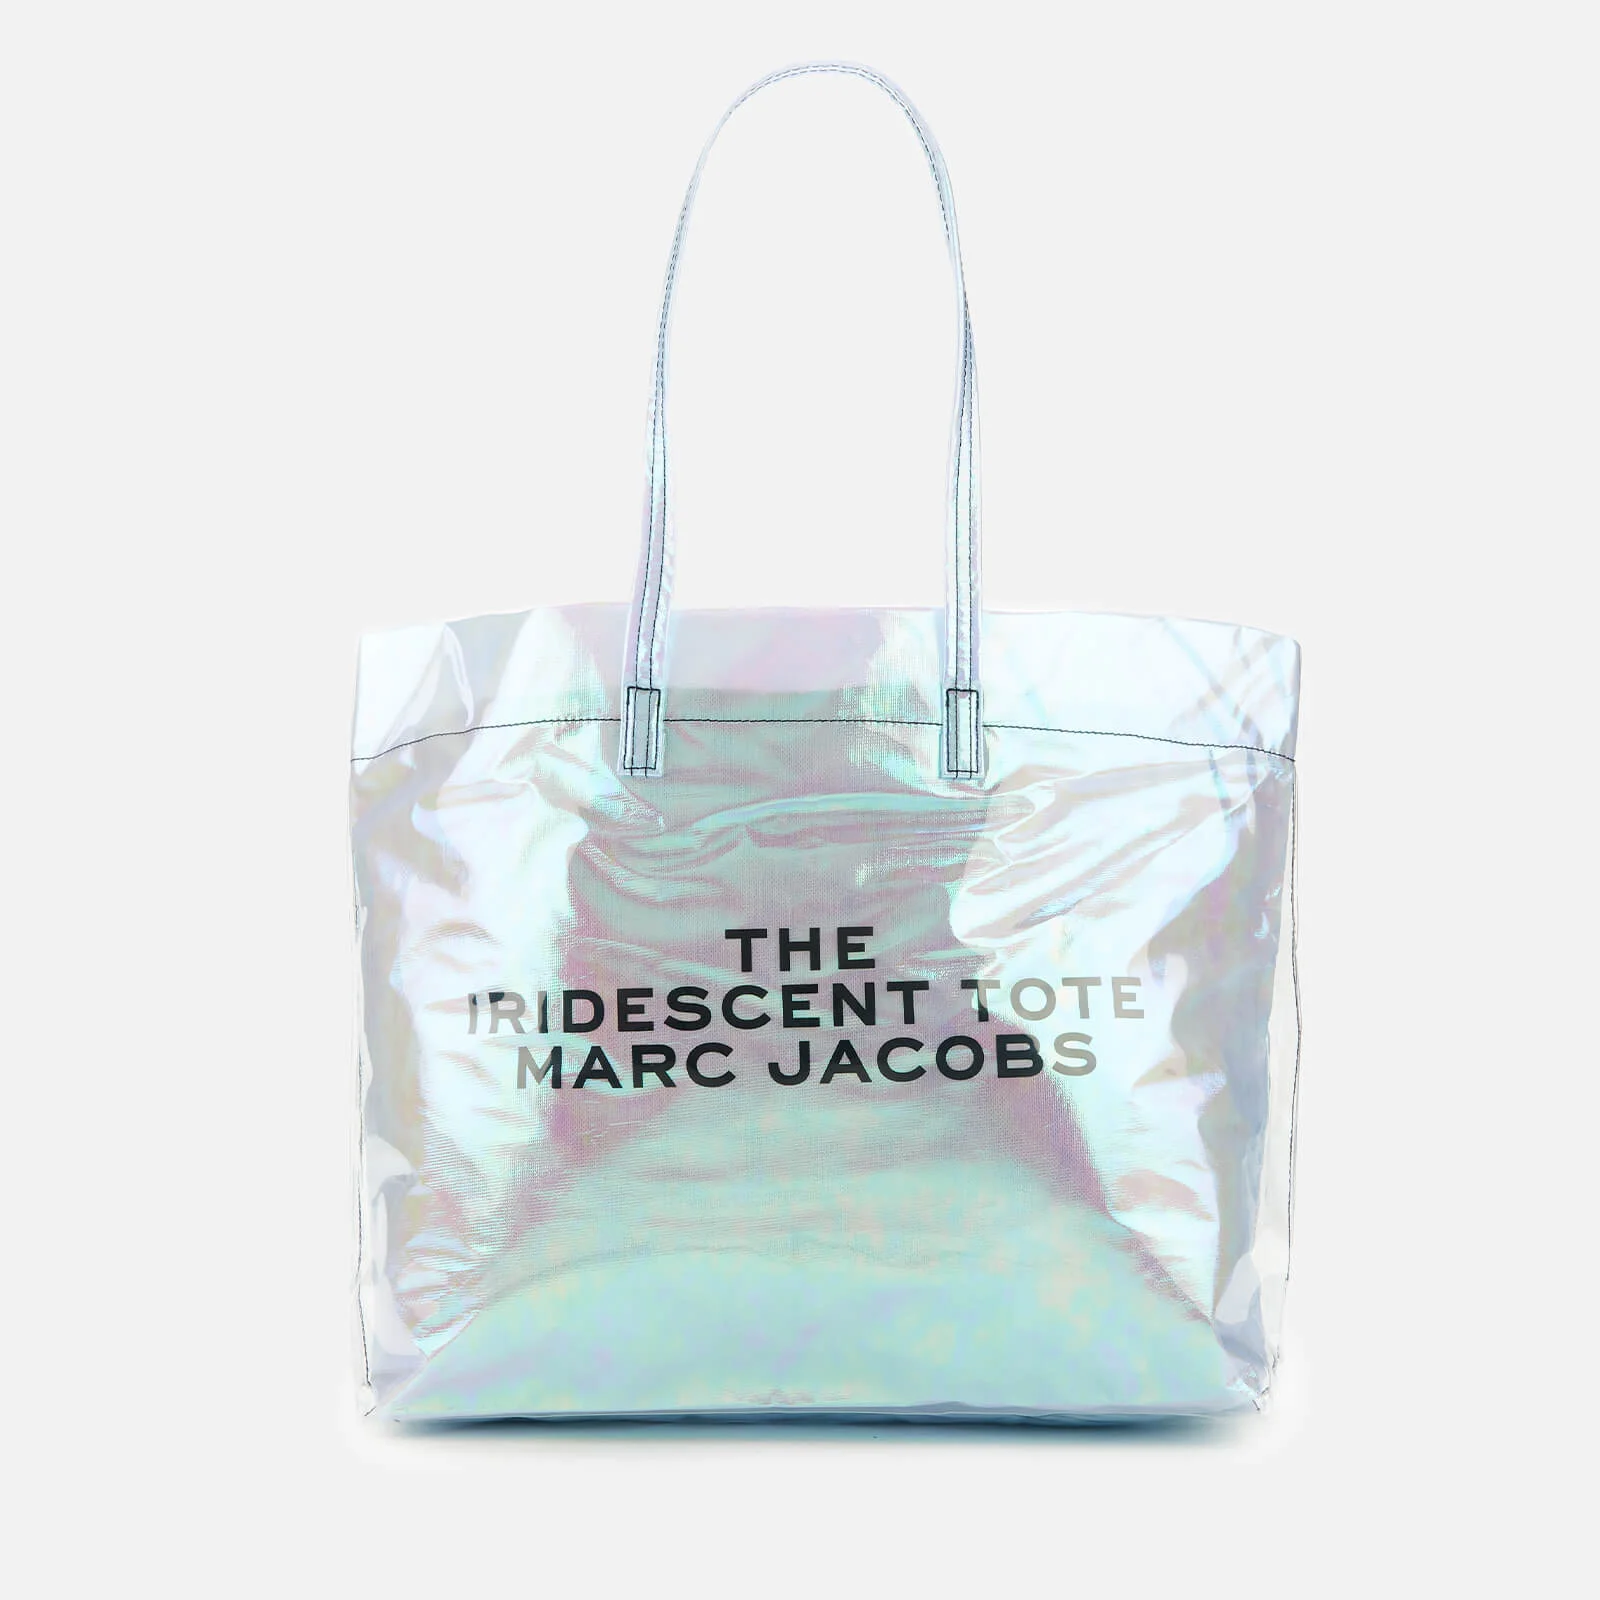 Marc Jacobs Women's The Iridescent Tote Bag - Blue Ice/Multi Image 1